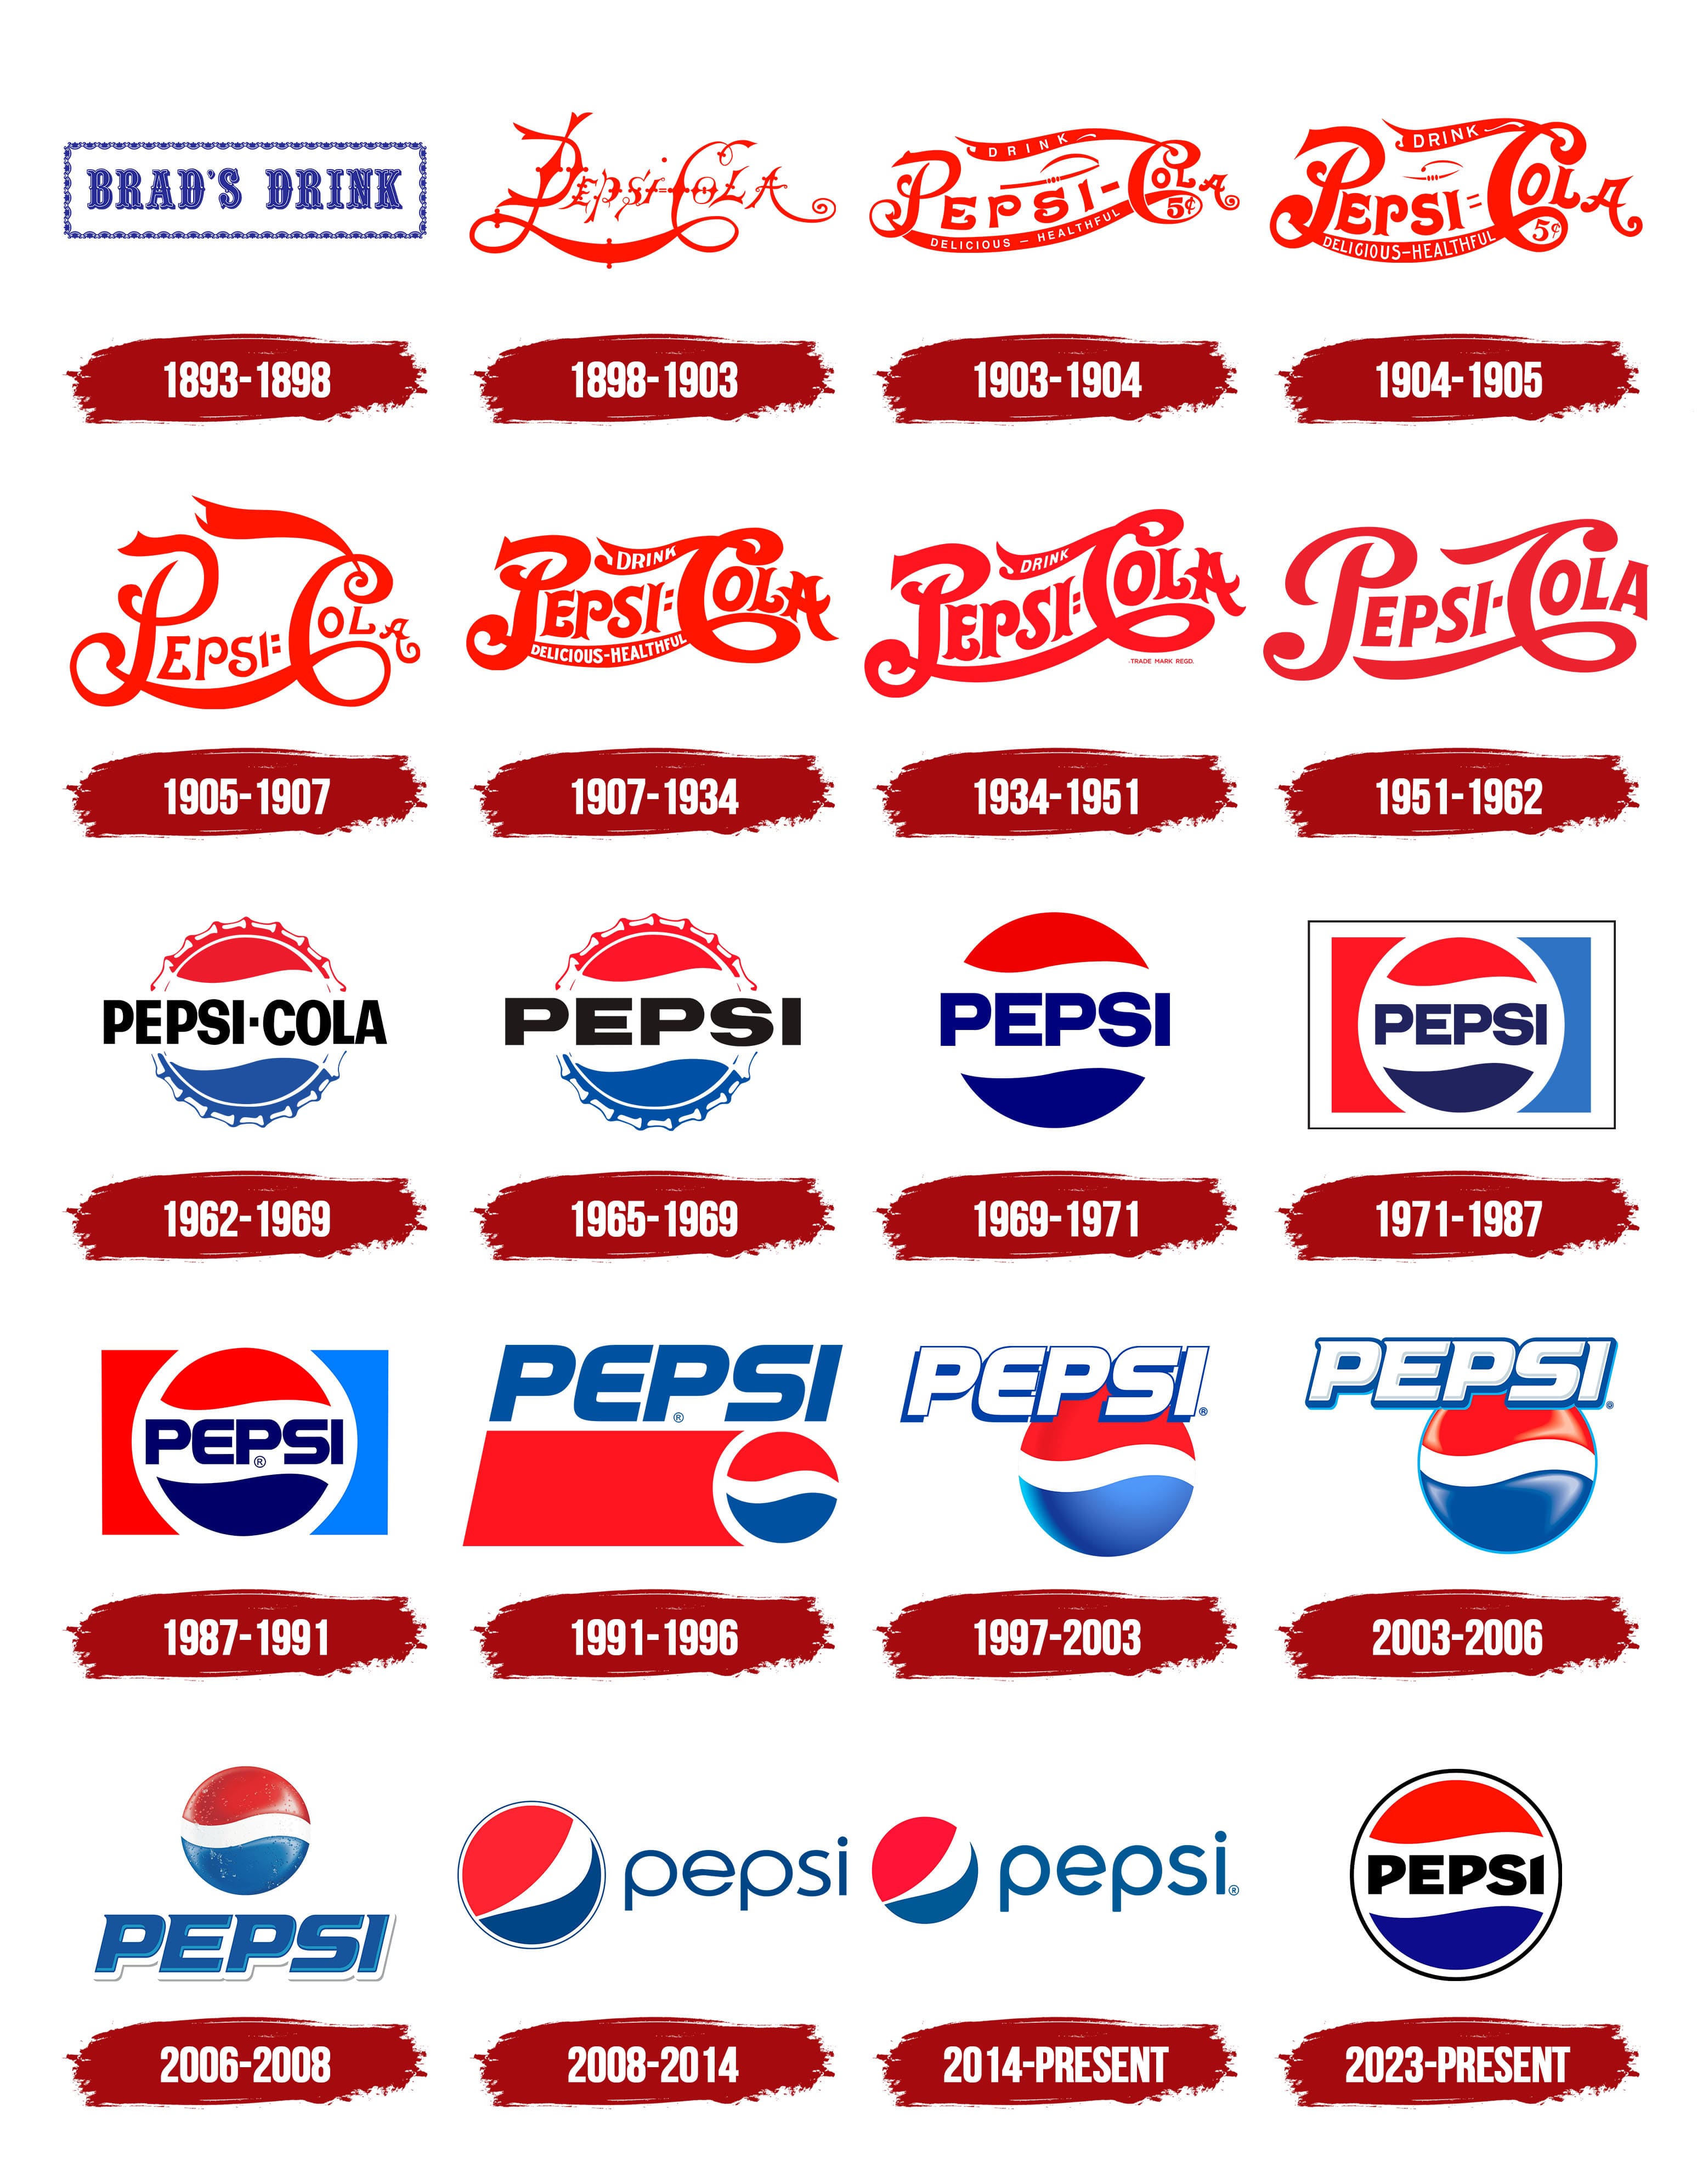 Top 99 the first pepsi logo most viewed and downloaded